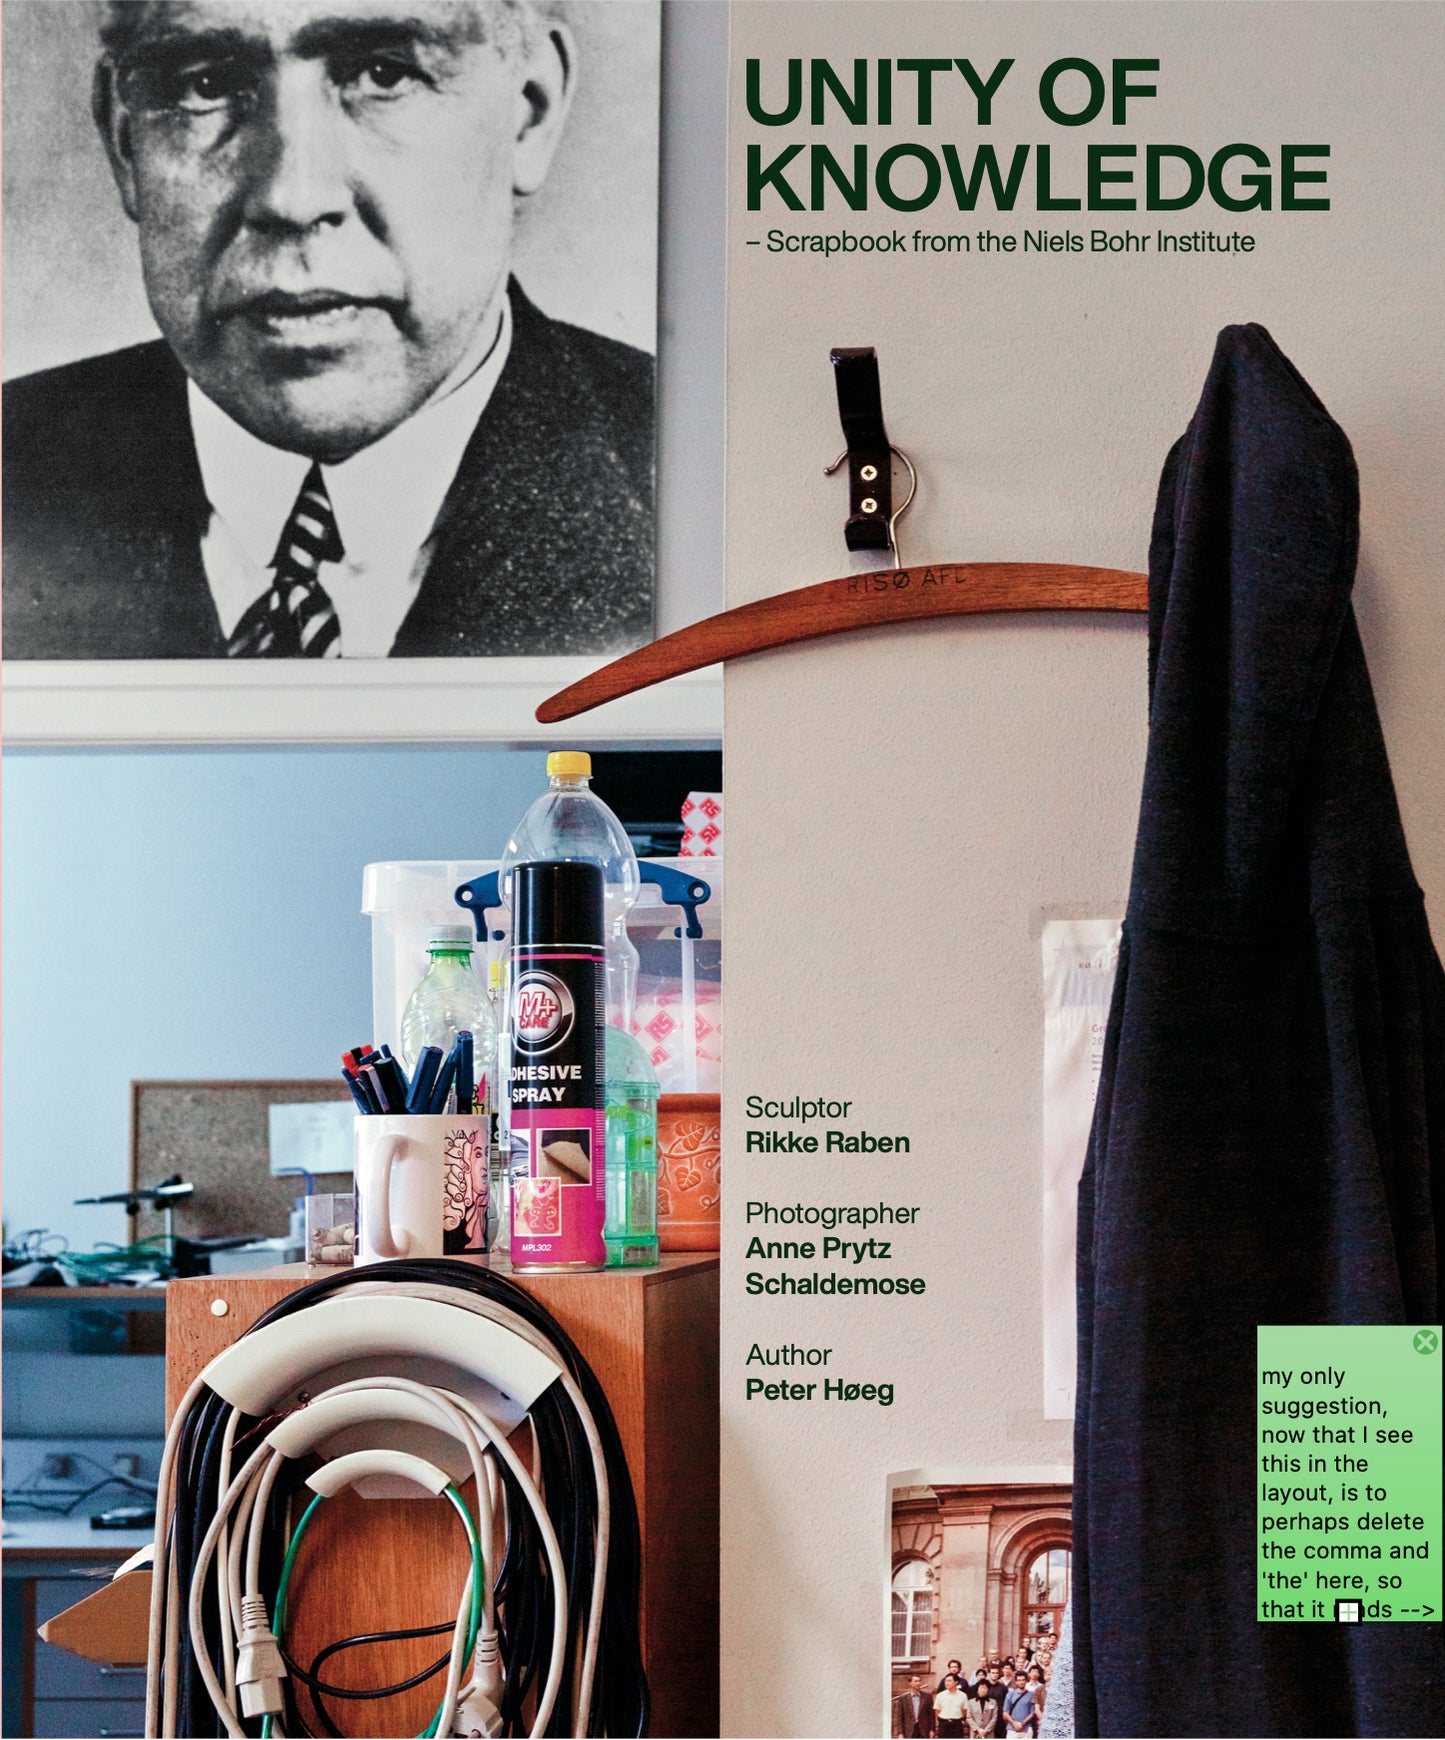 Unity of Knowledge – Scrapbook from the Niels Bohr Institute